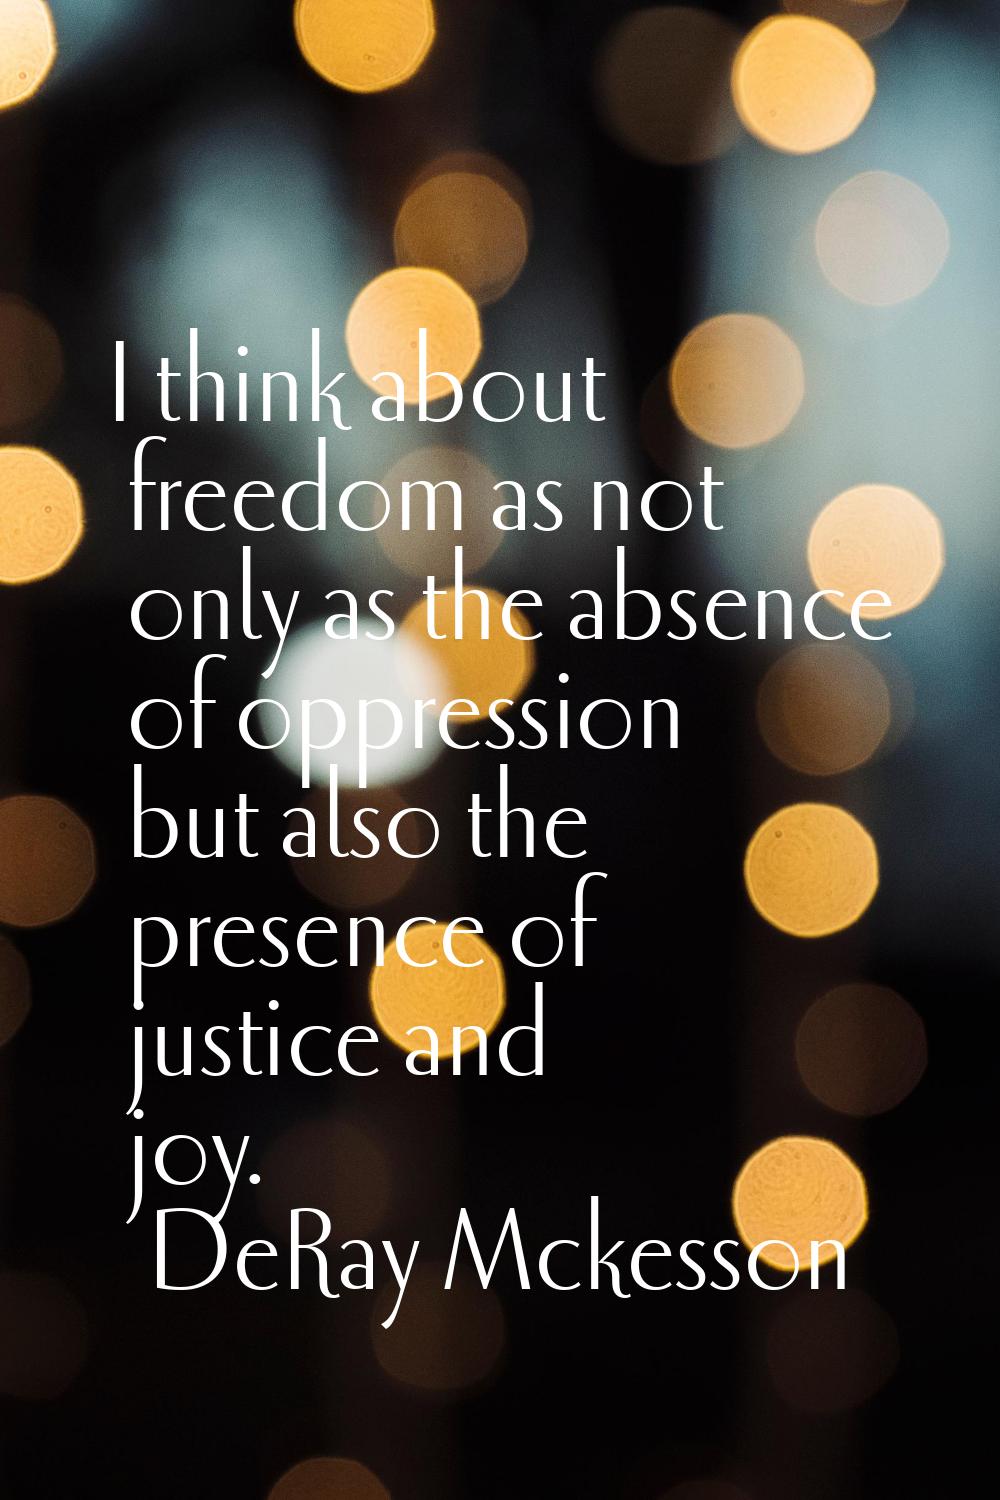 I think about freedom as not only as the absence of oppression but also the presence of justice and